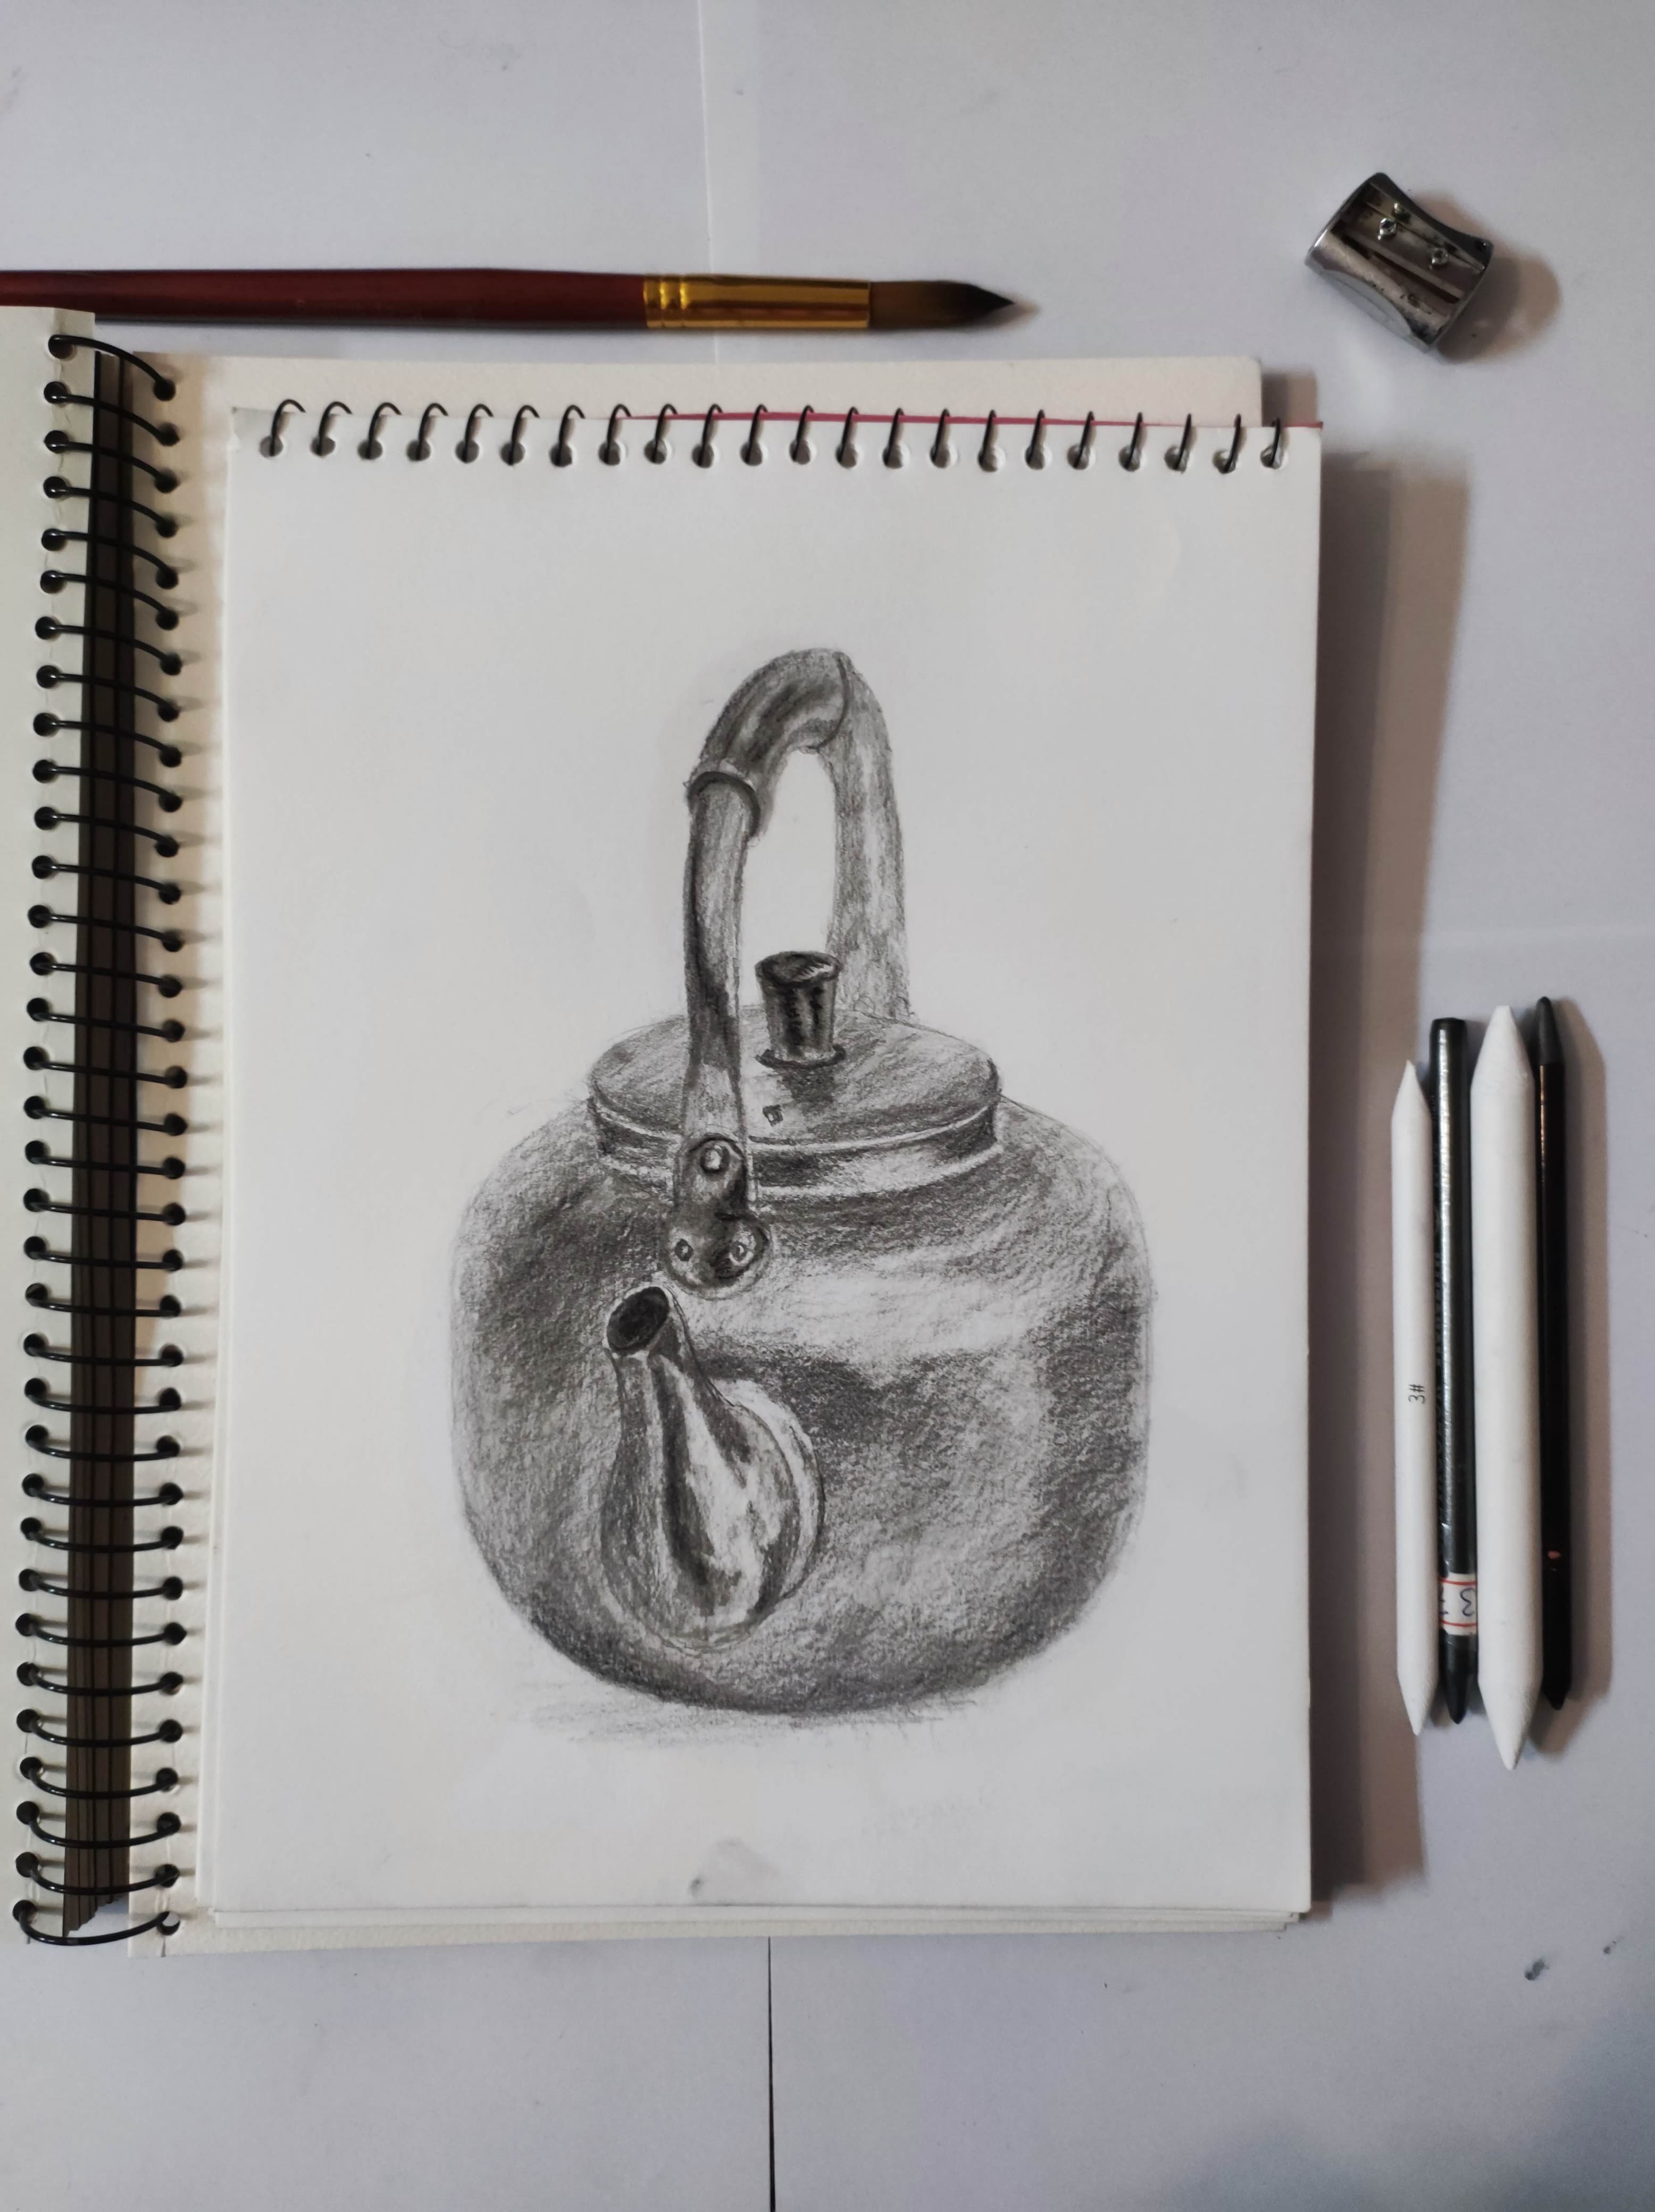 Learn Still life Drawing with Easy Pencil Strokes - YouTube